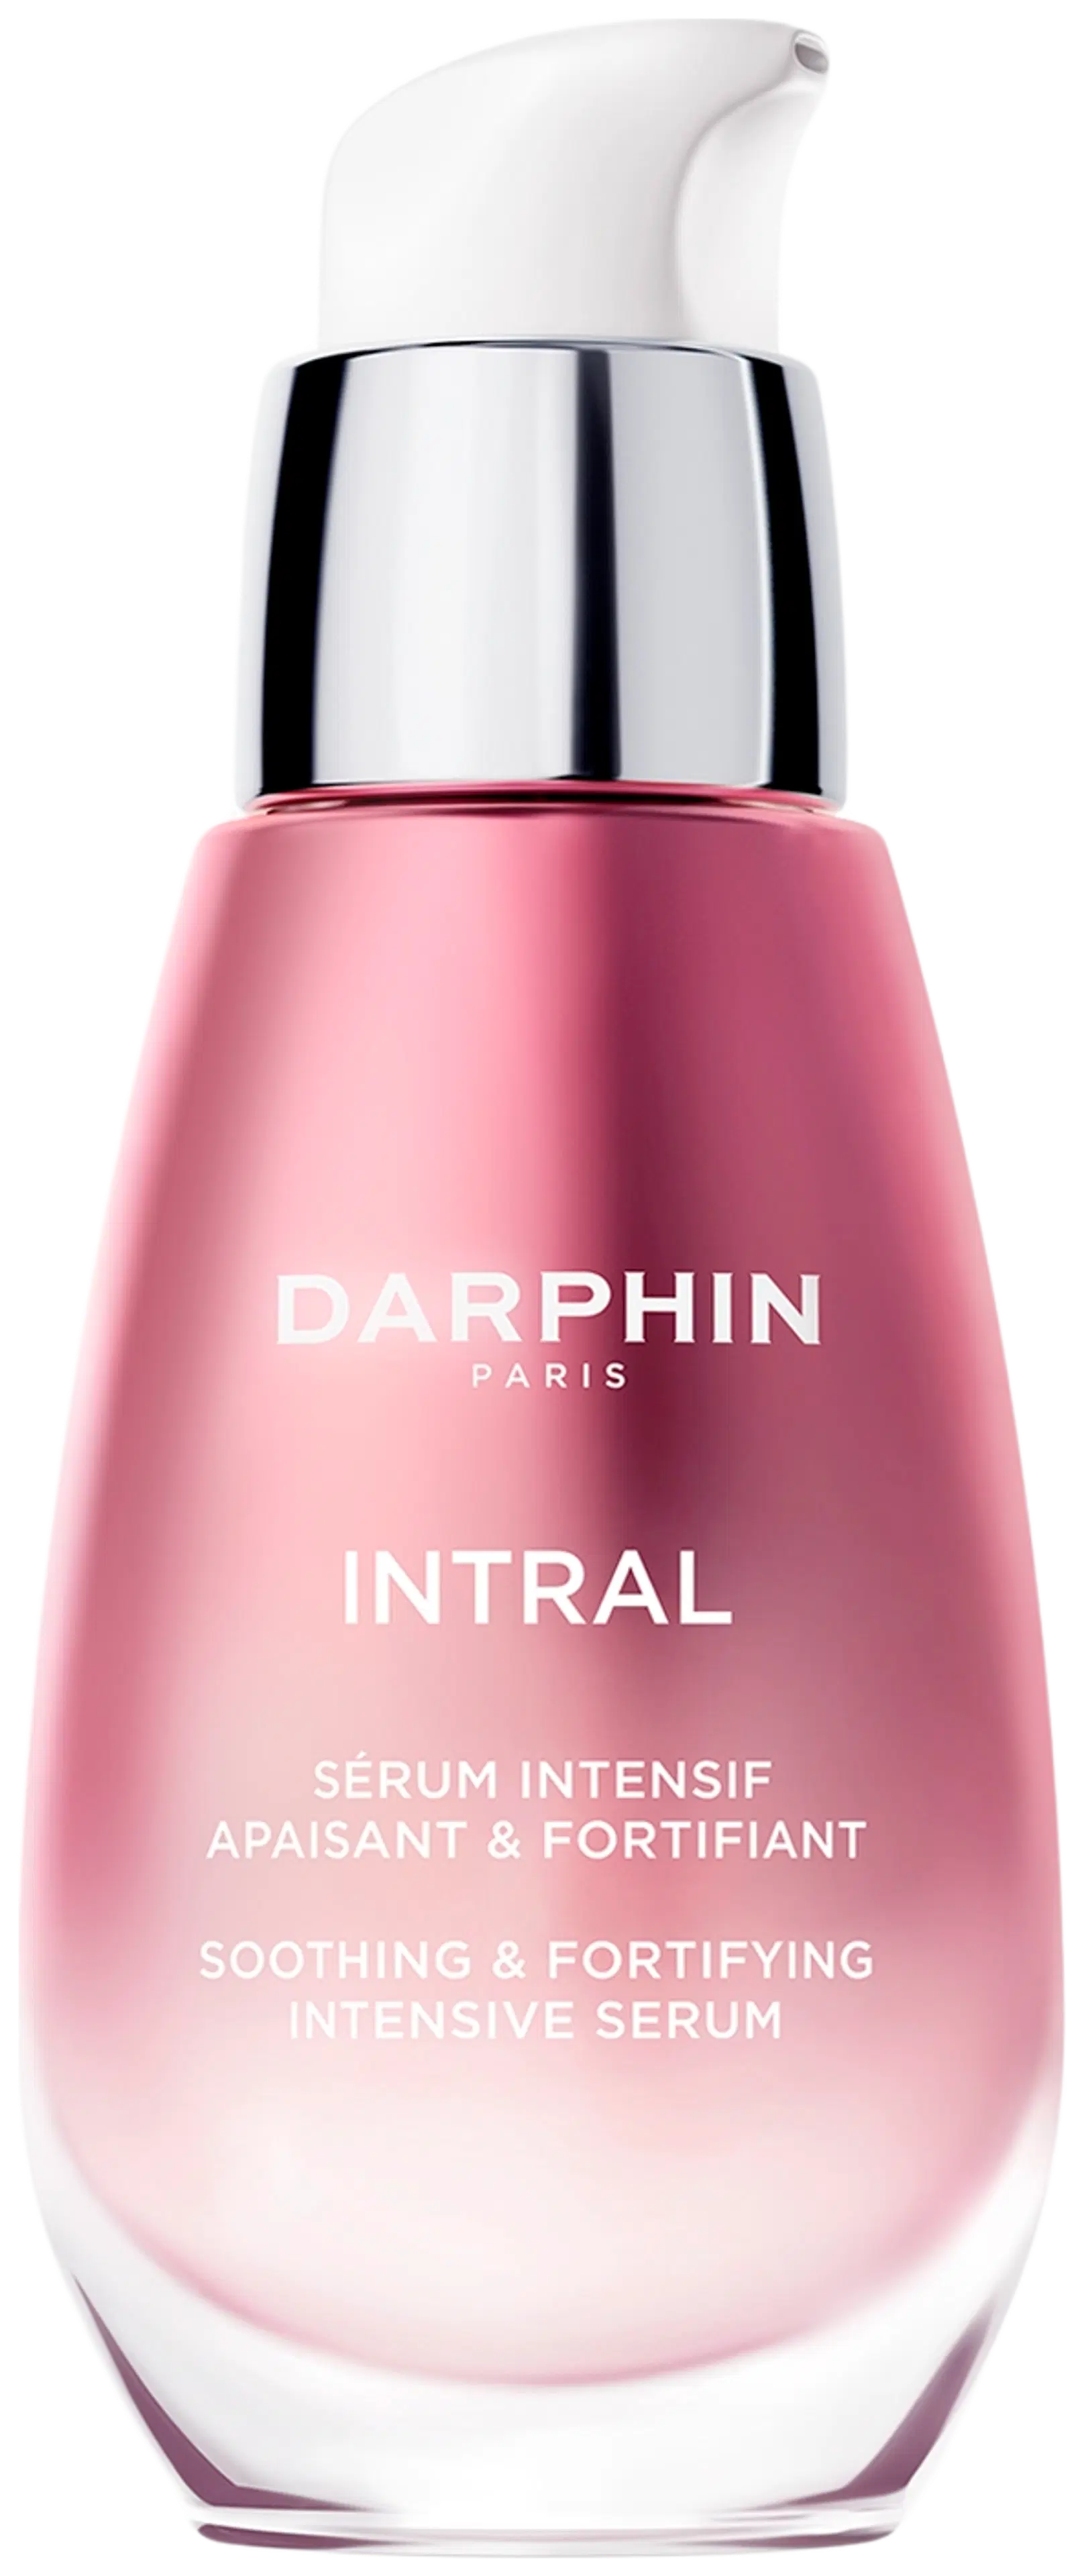 Darphin Intral Soothing & Fortifying Intensive Serum